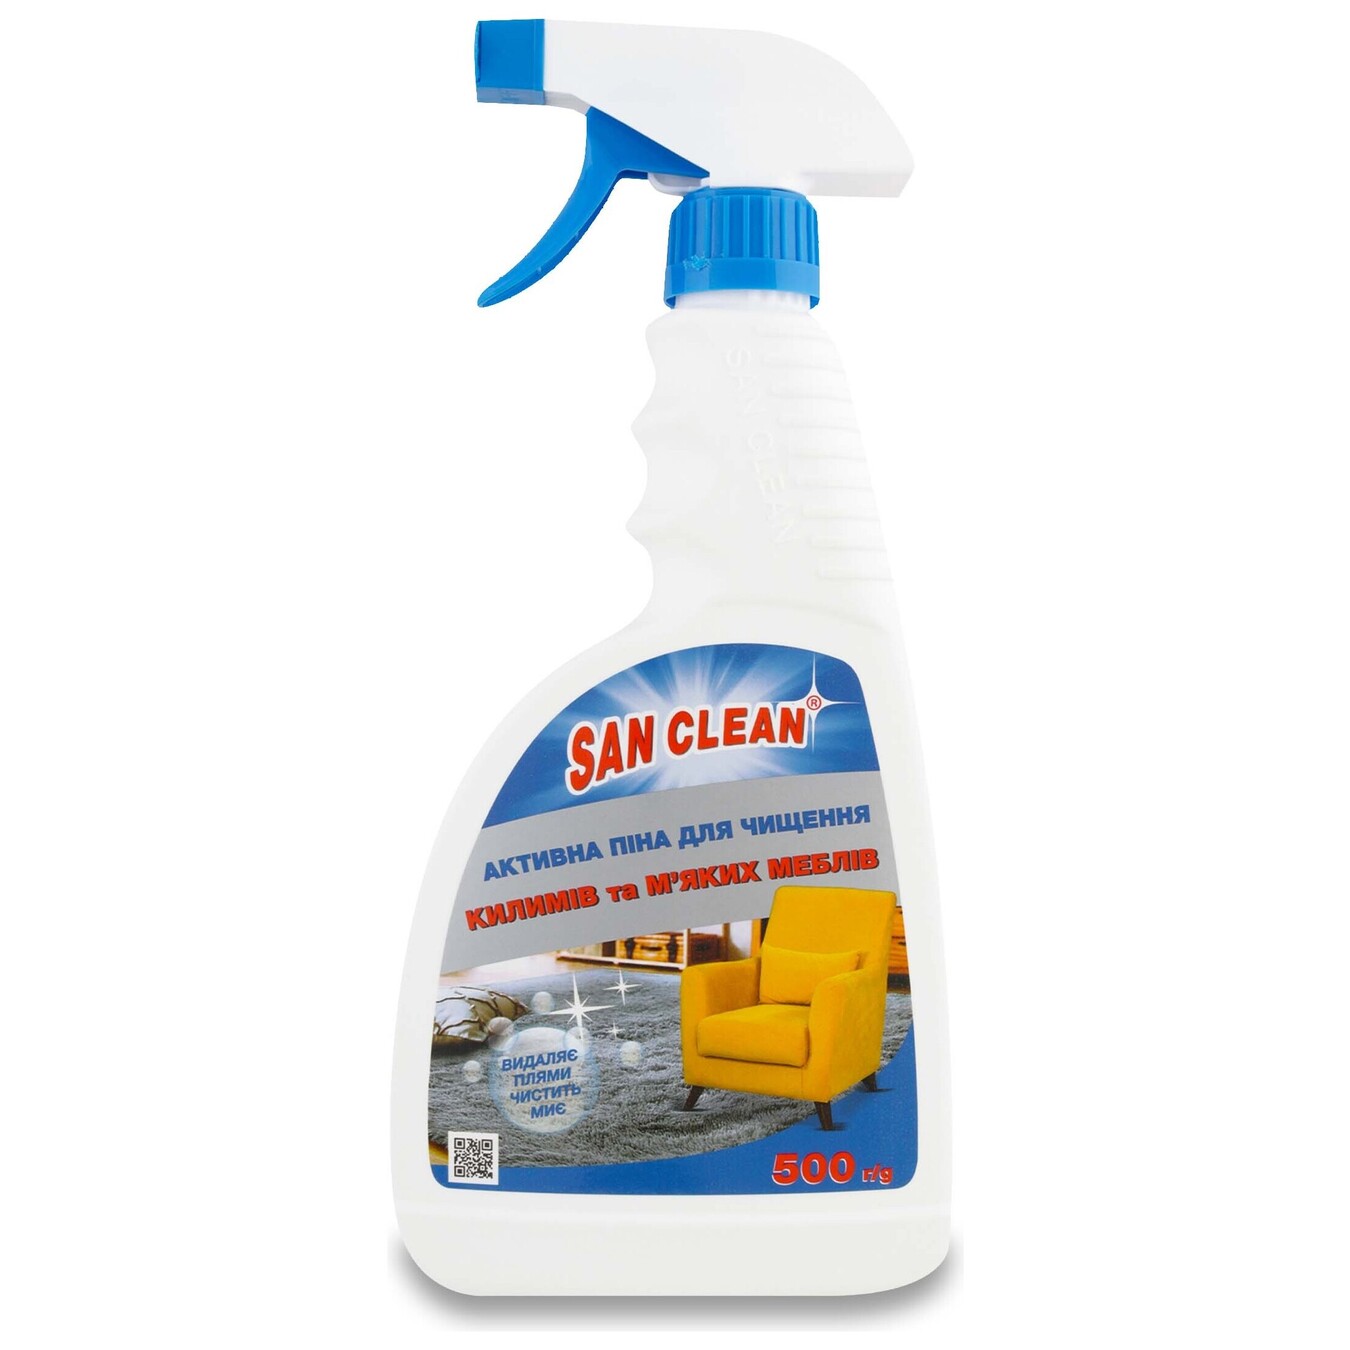 San Clean Universal-2000 means for removing stains and cleaning carpets with a sprayer 500g